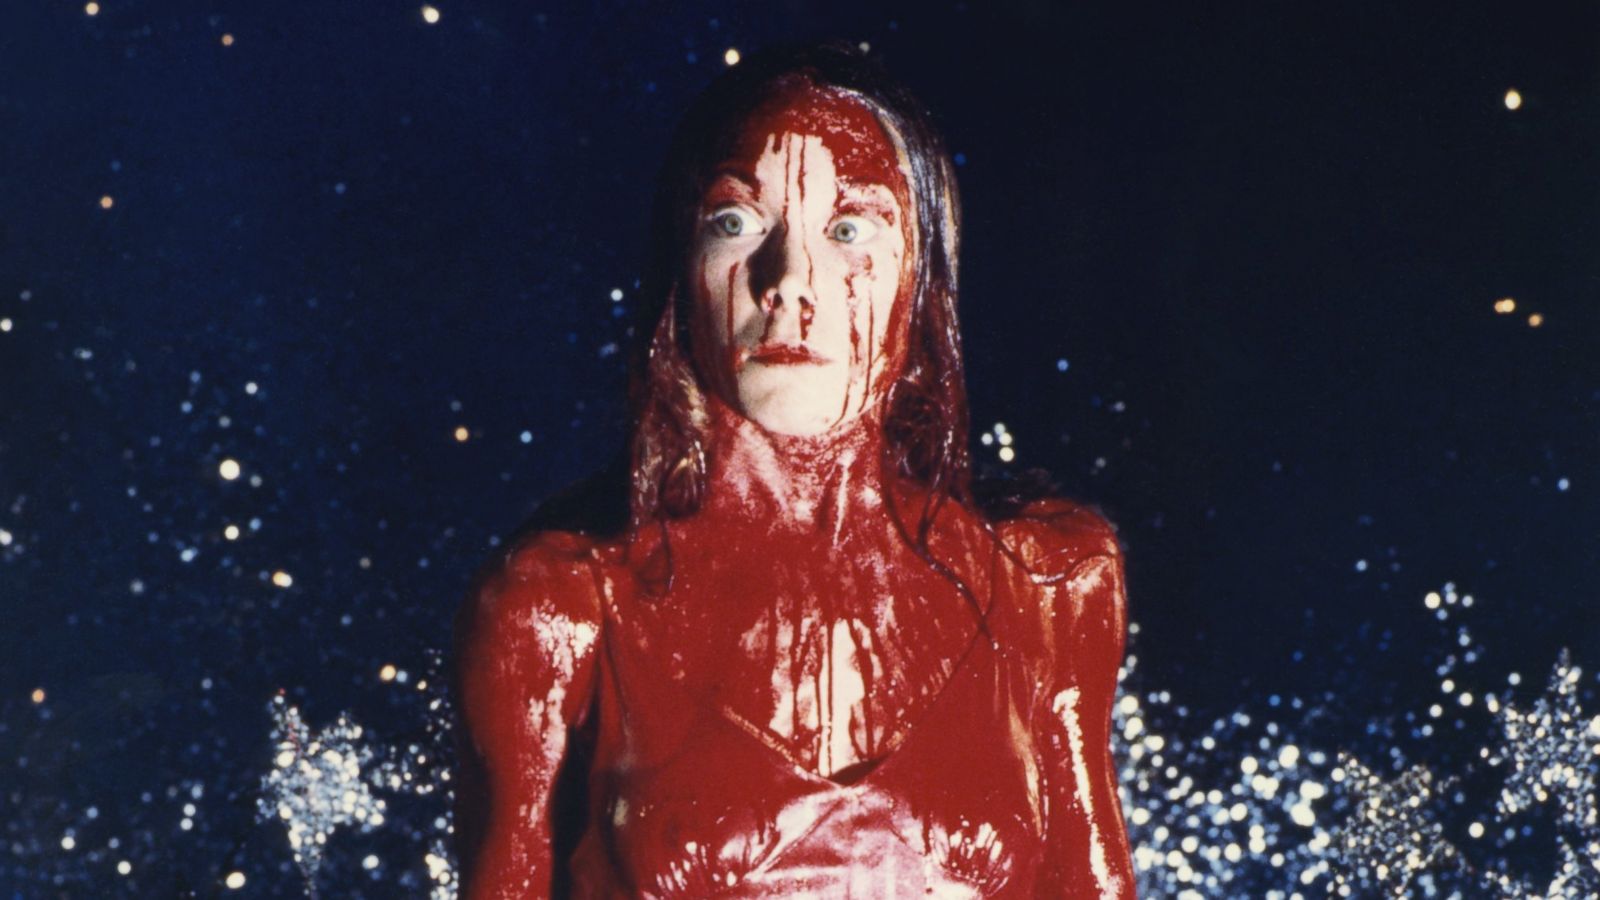 Carrie White (Sissy Spacek) covered in pig's blood during the prom scene in 'Carrie'